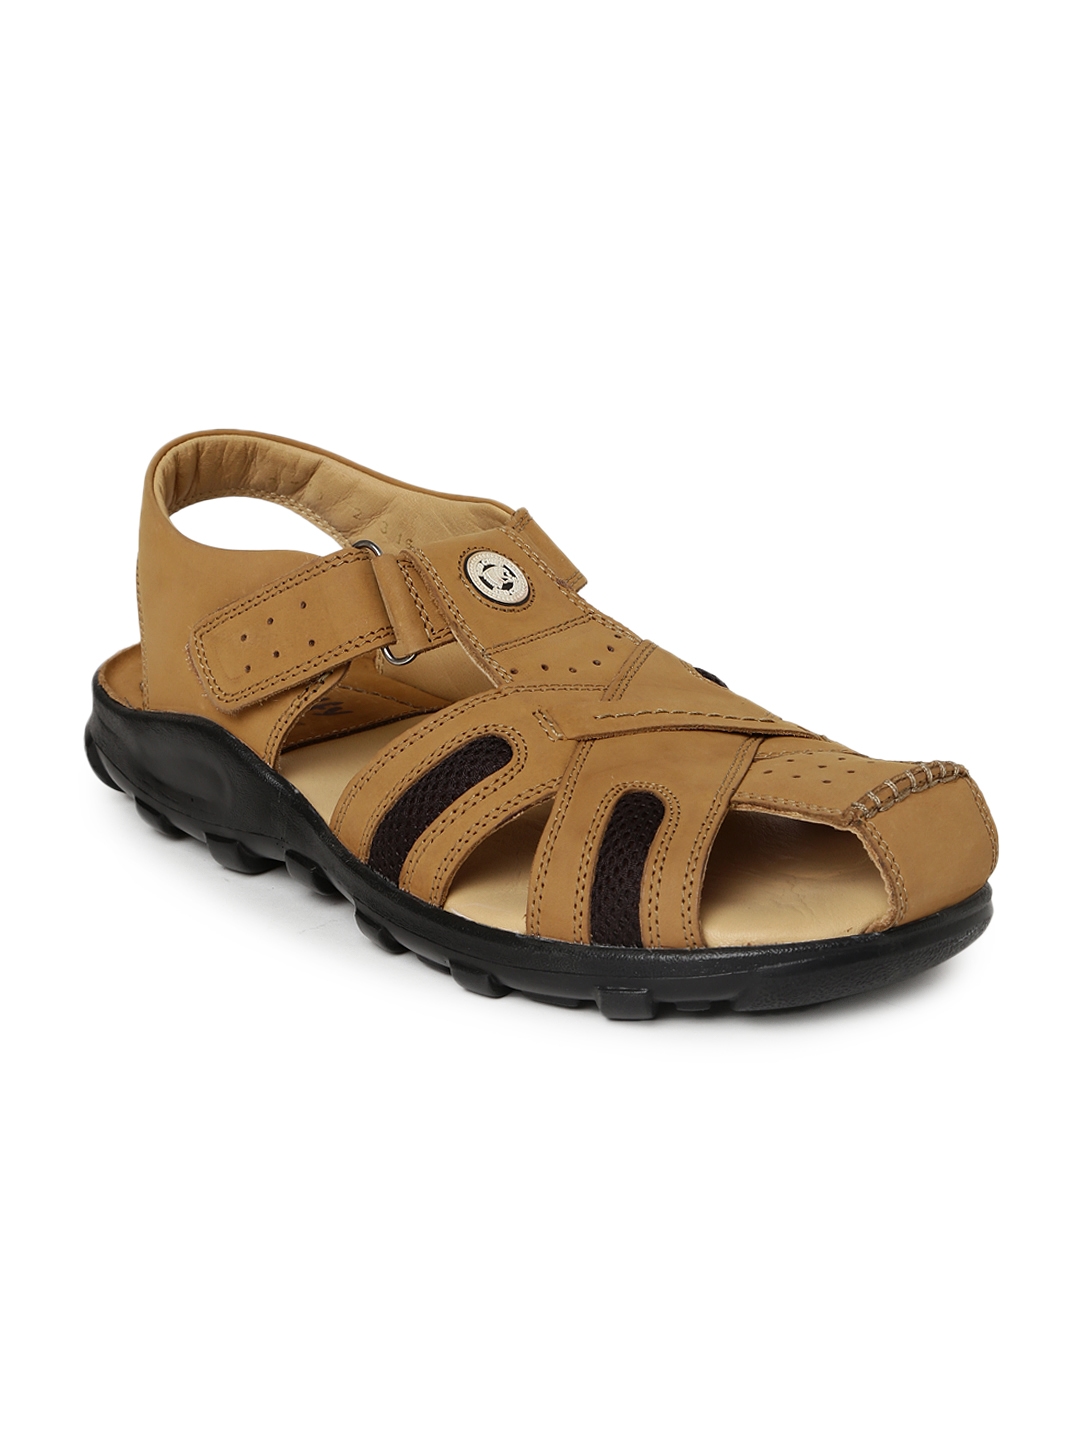 Buy Tan Sandals for Men by Red chief Online | Ajio.com